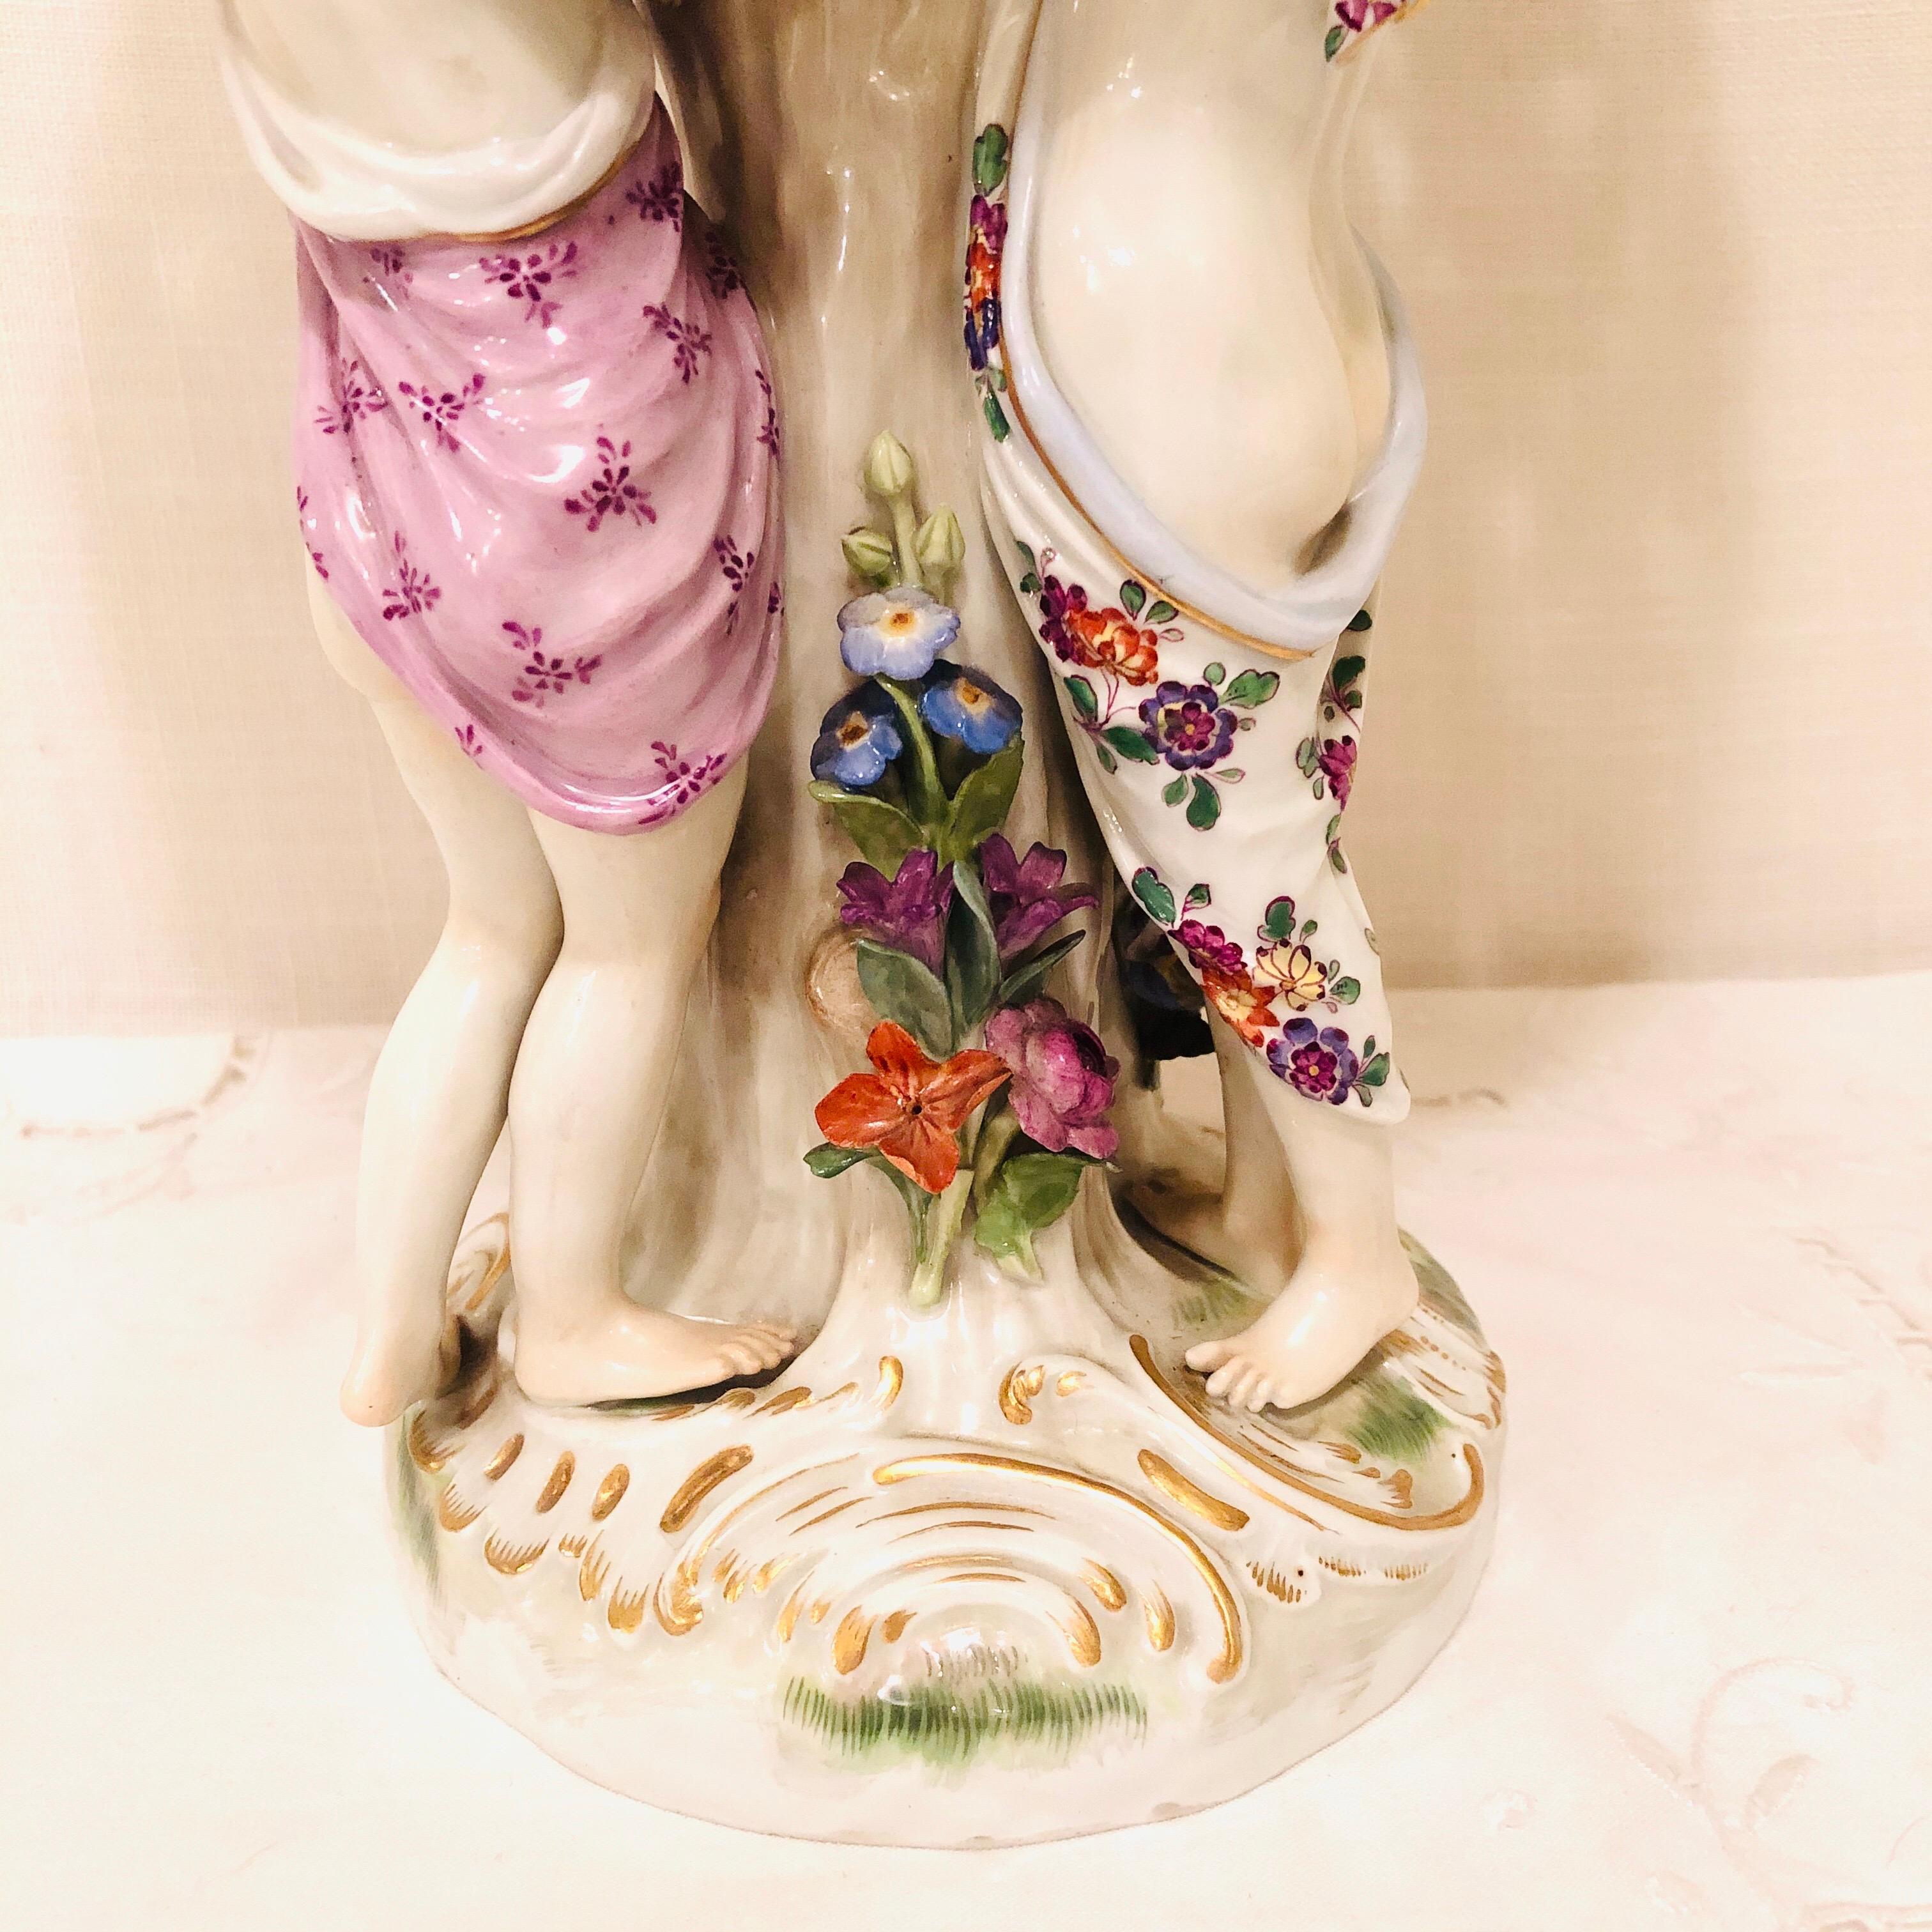 Rococo Meissen Centerpiece Depicting the Three Charities or Graces Dancing in a Circle